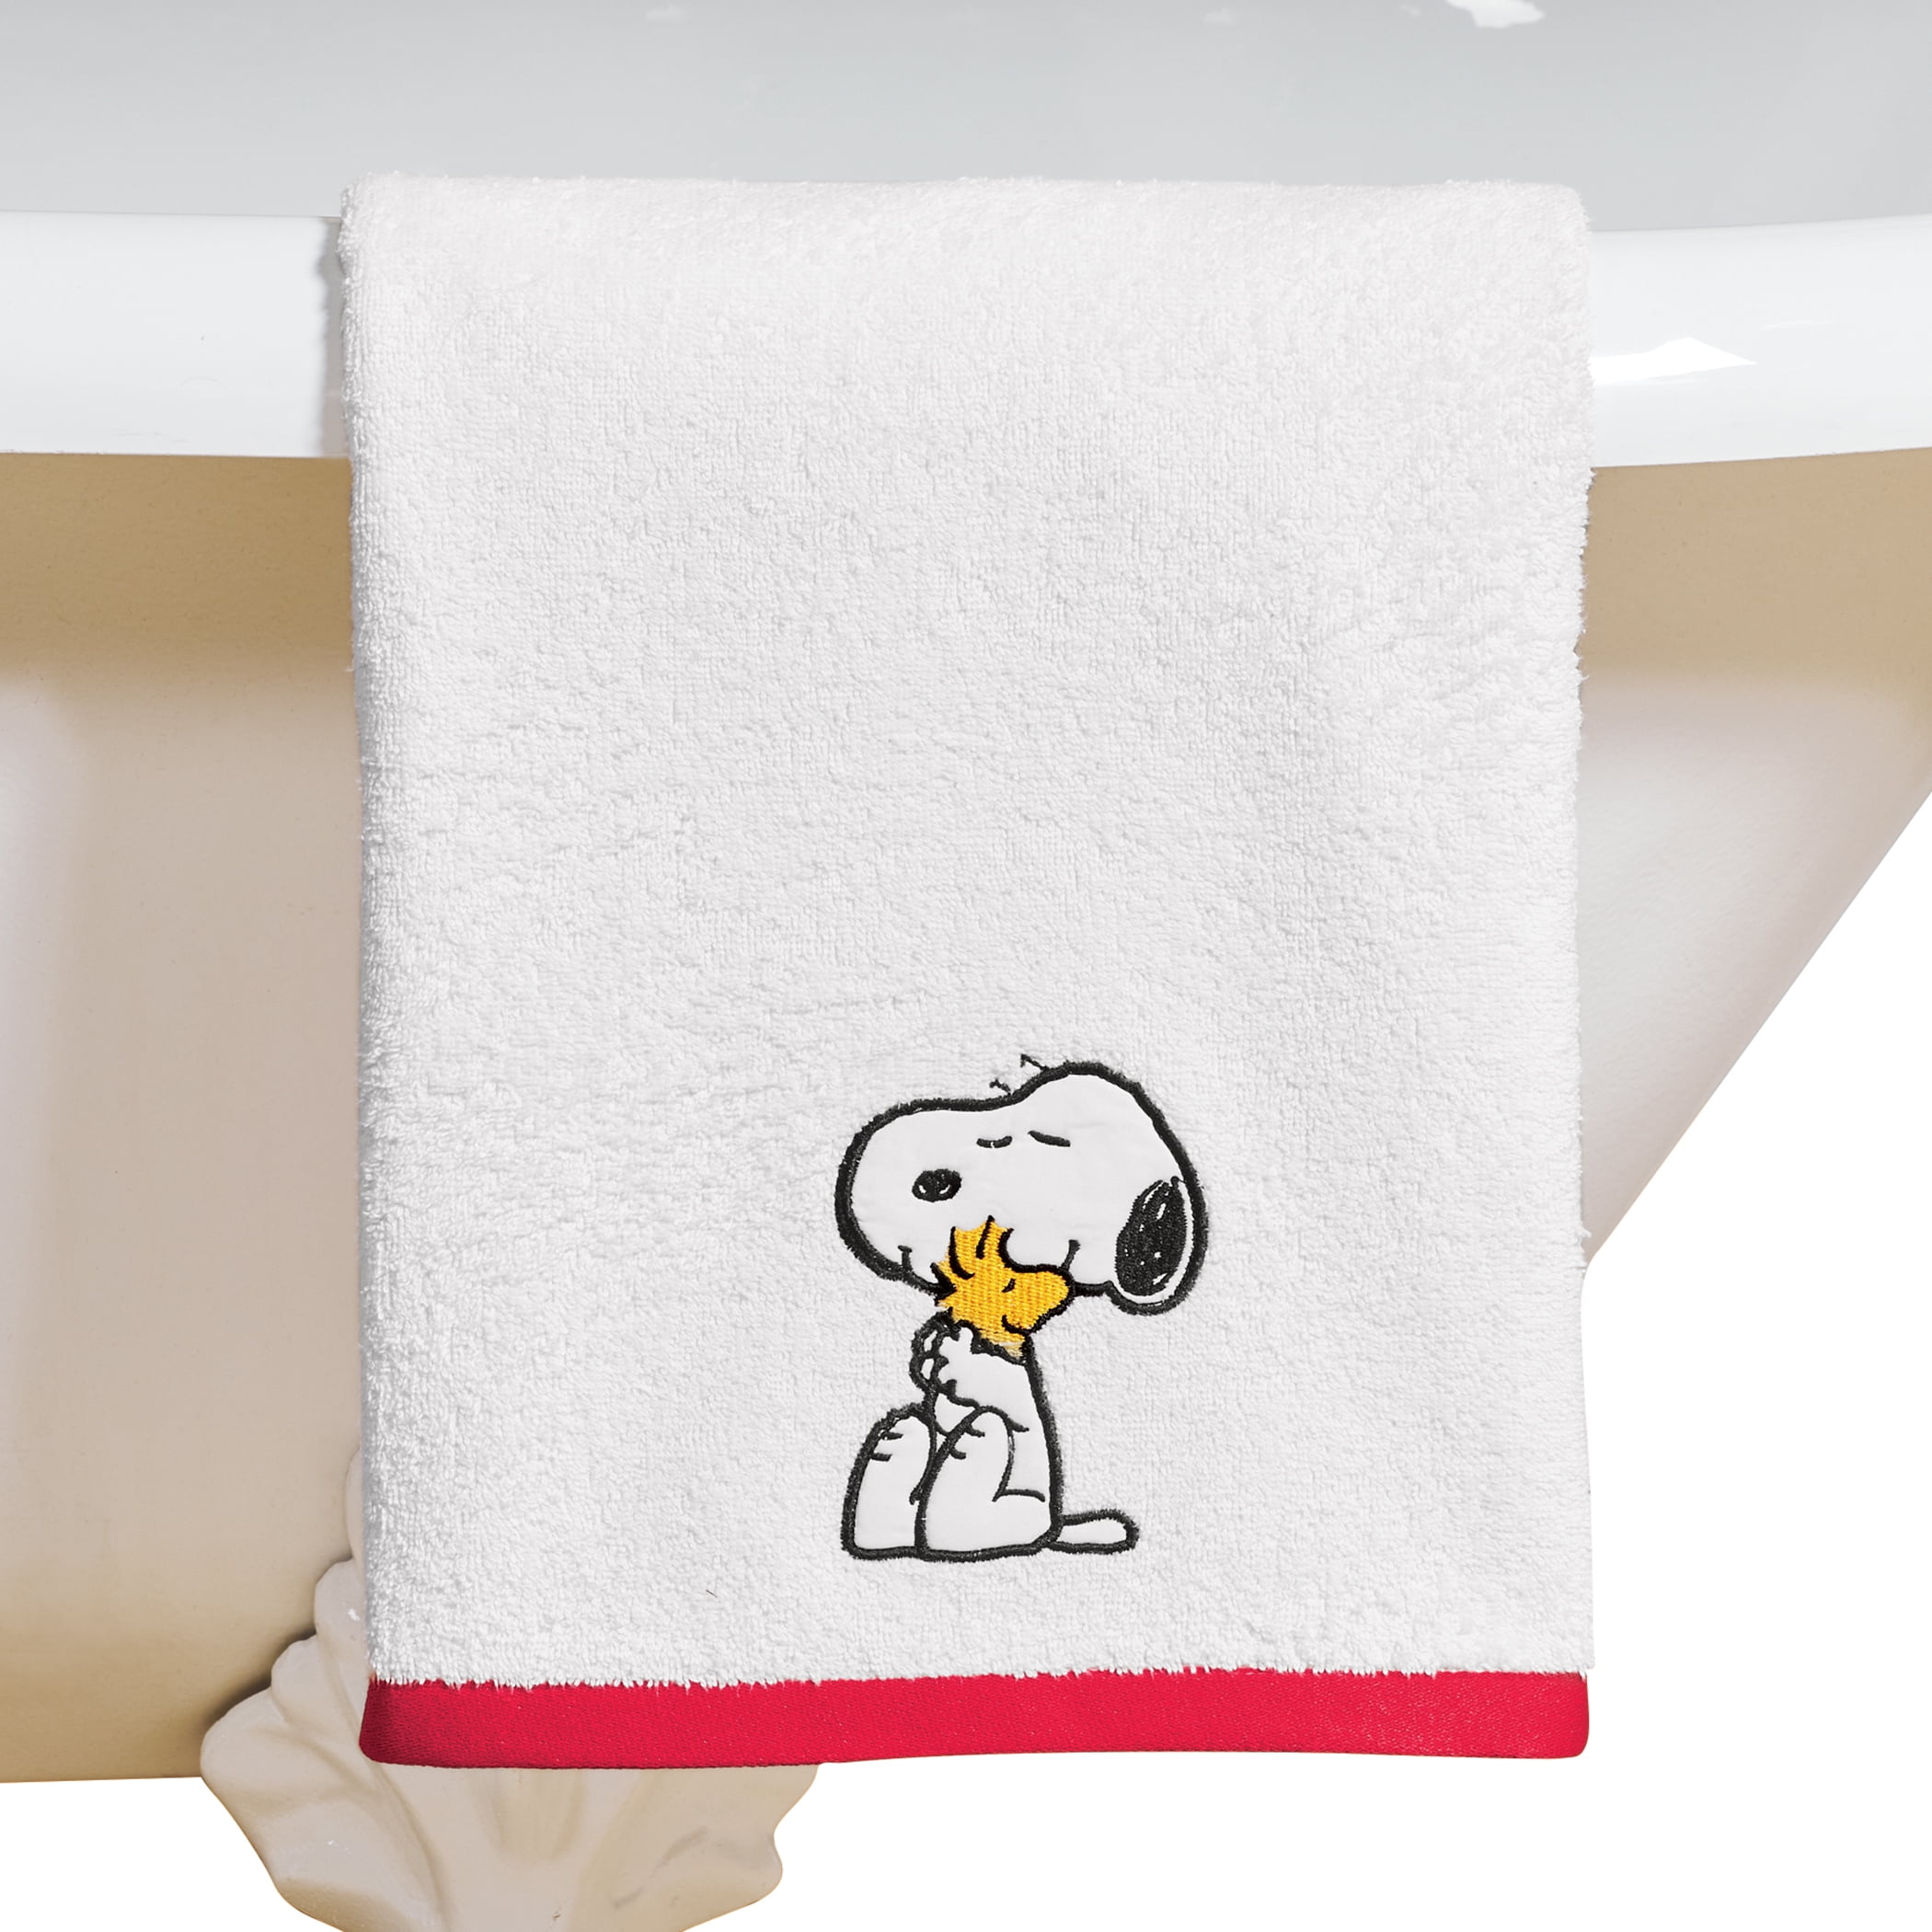 Peanuts Holiday Bath Towel in Red 